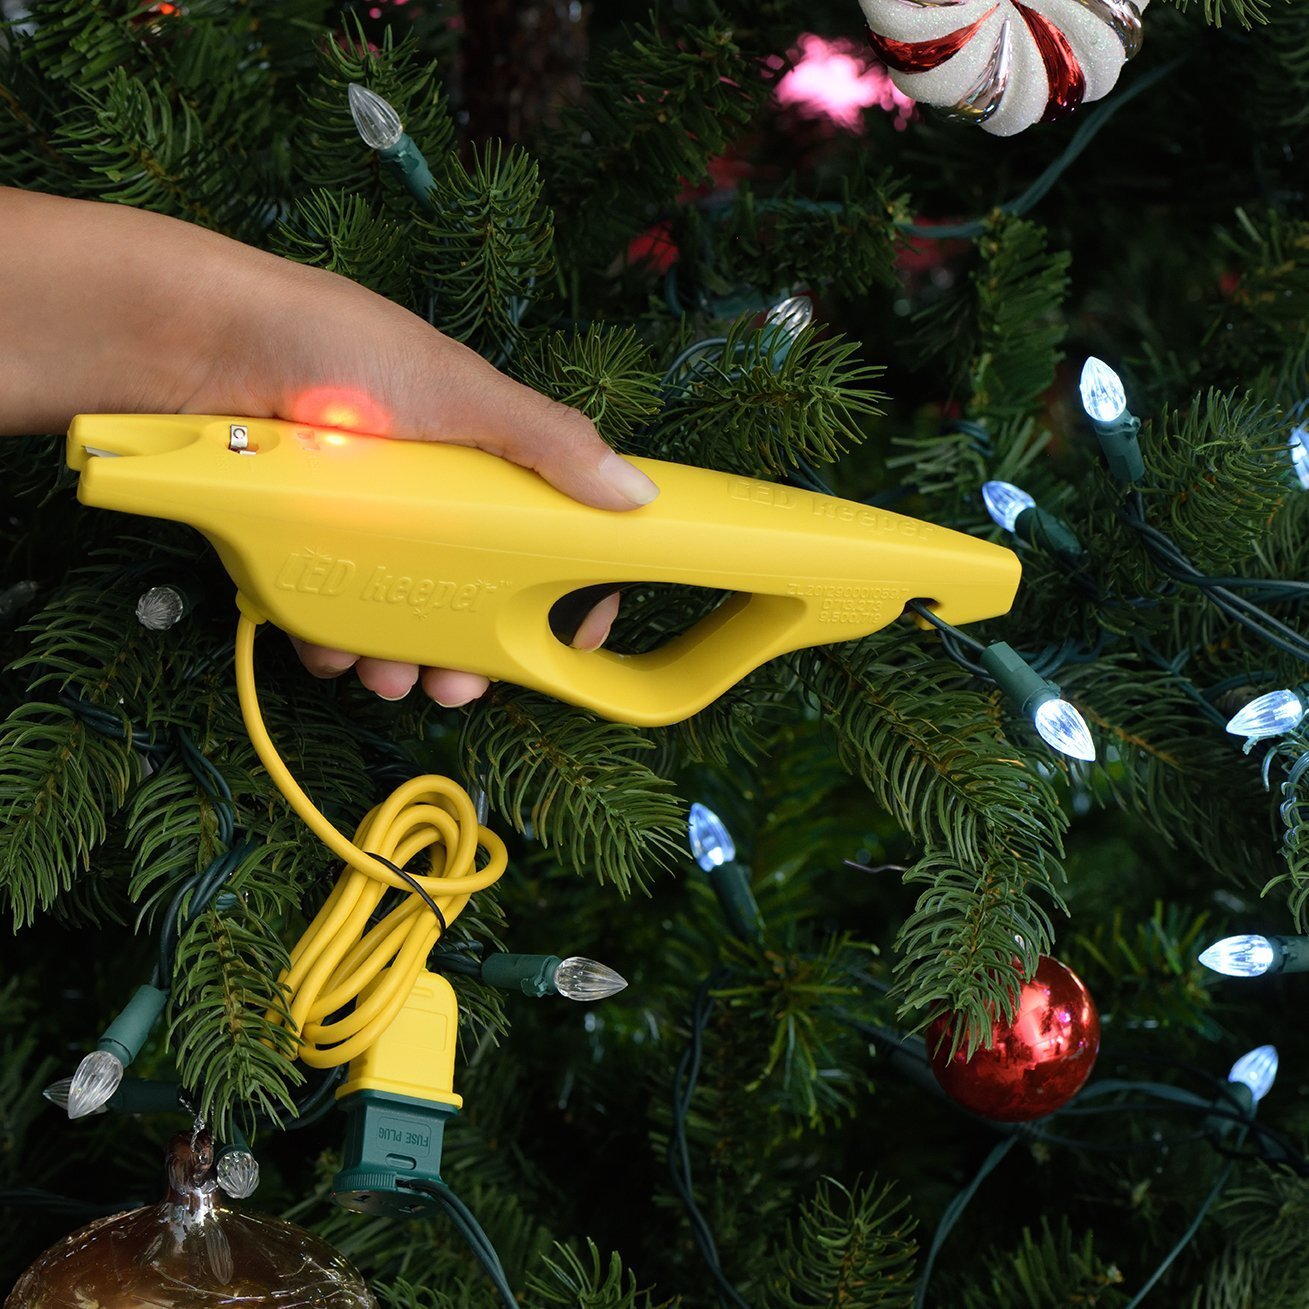 Light Keeper Pro-The Complete Tool for Fixing Your Christmas Lights